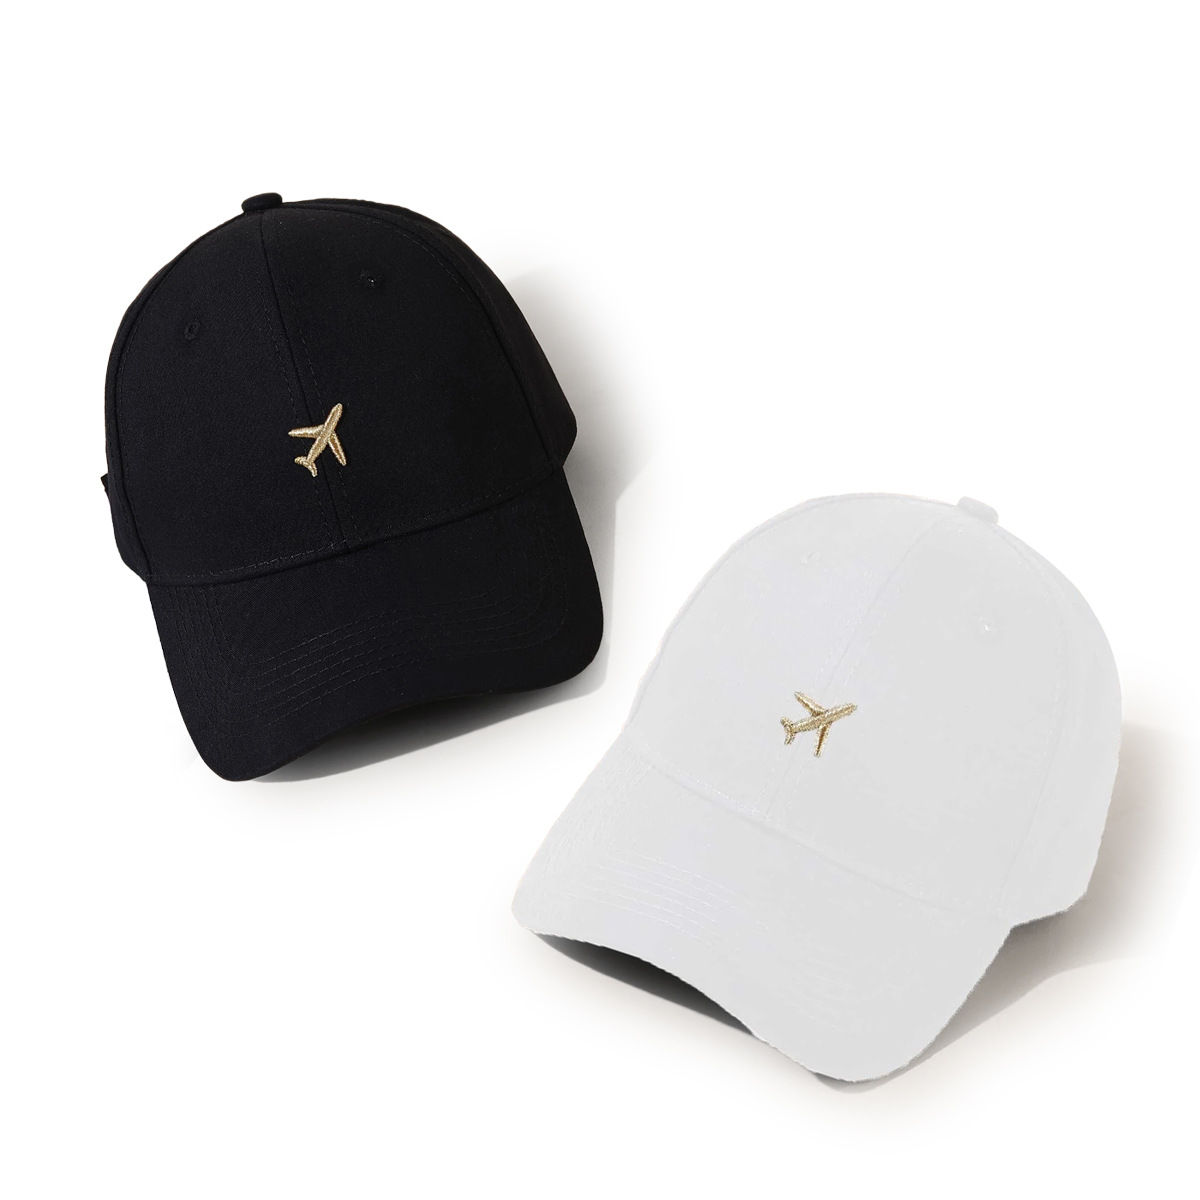 Hot Selling Hat Womens KoreanStyle Fashionable SunProof Embroidered Aircraft Baseball Cap Japanese Style FaceLooking Little Wild Peaked Cap Menpicture4